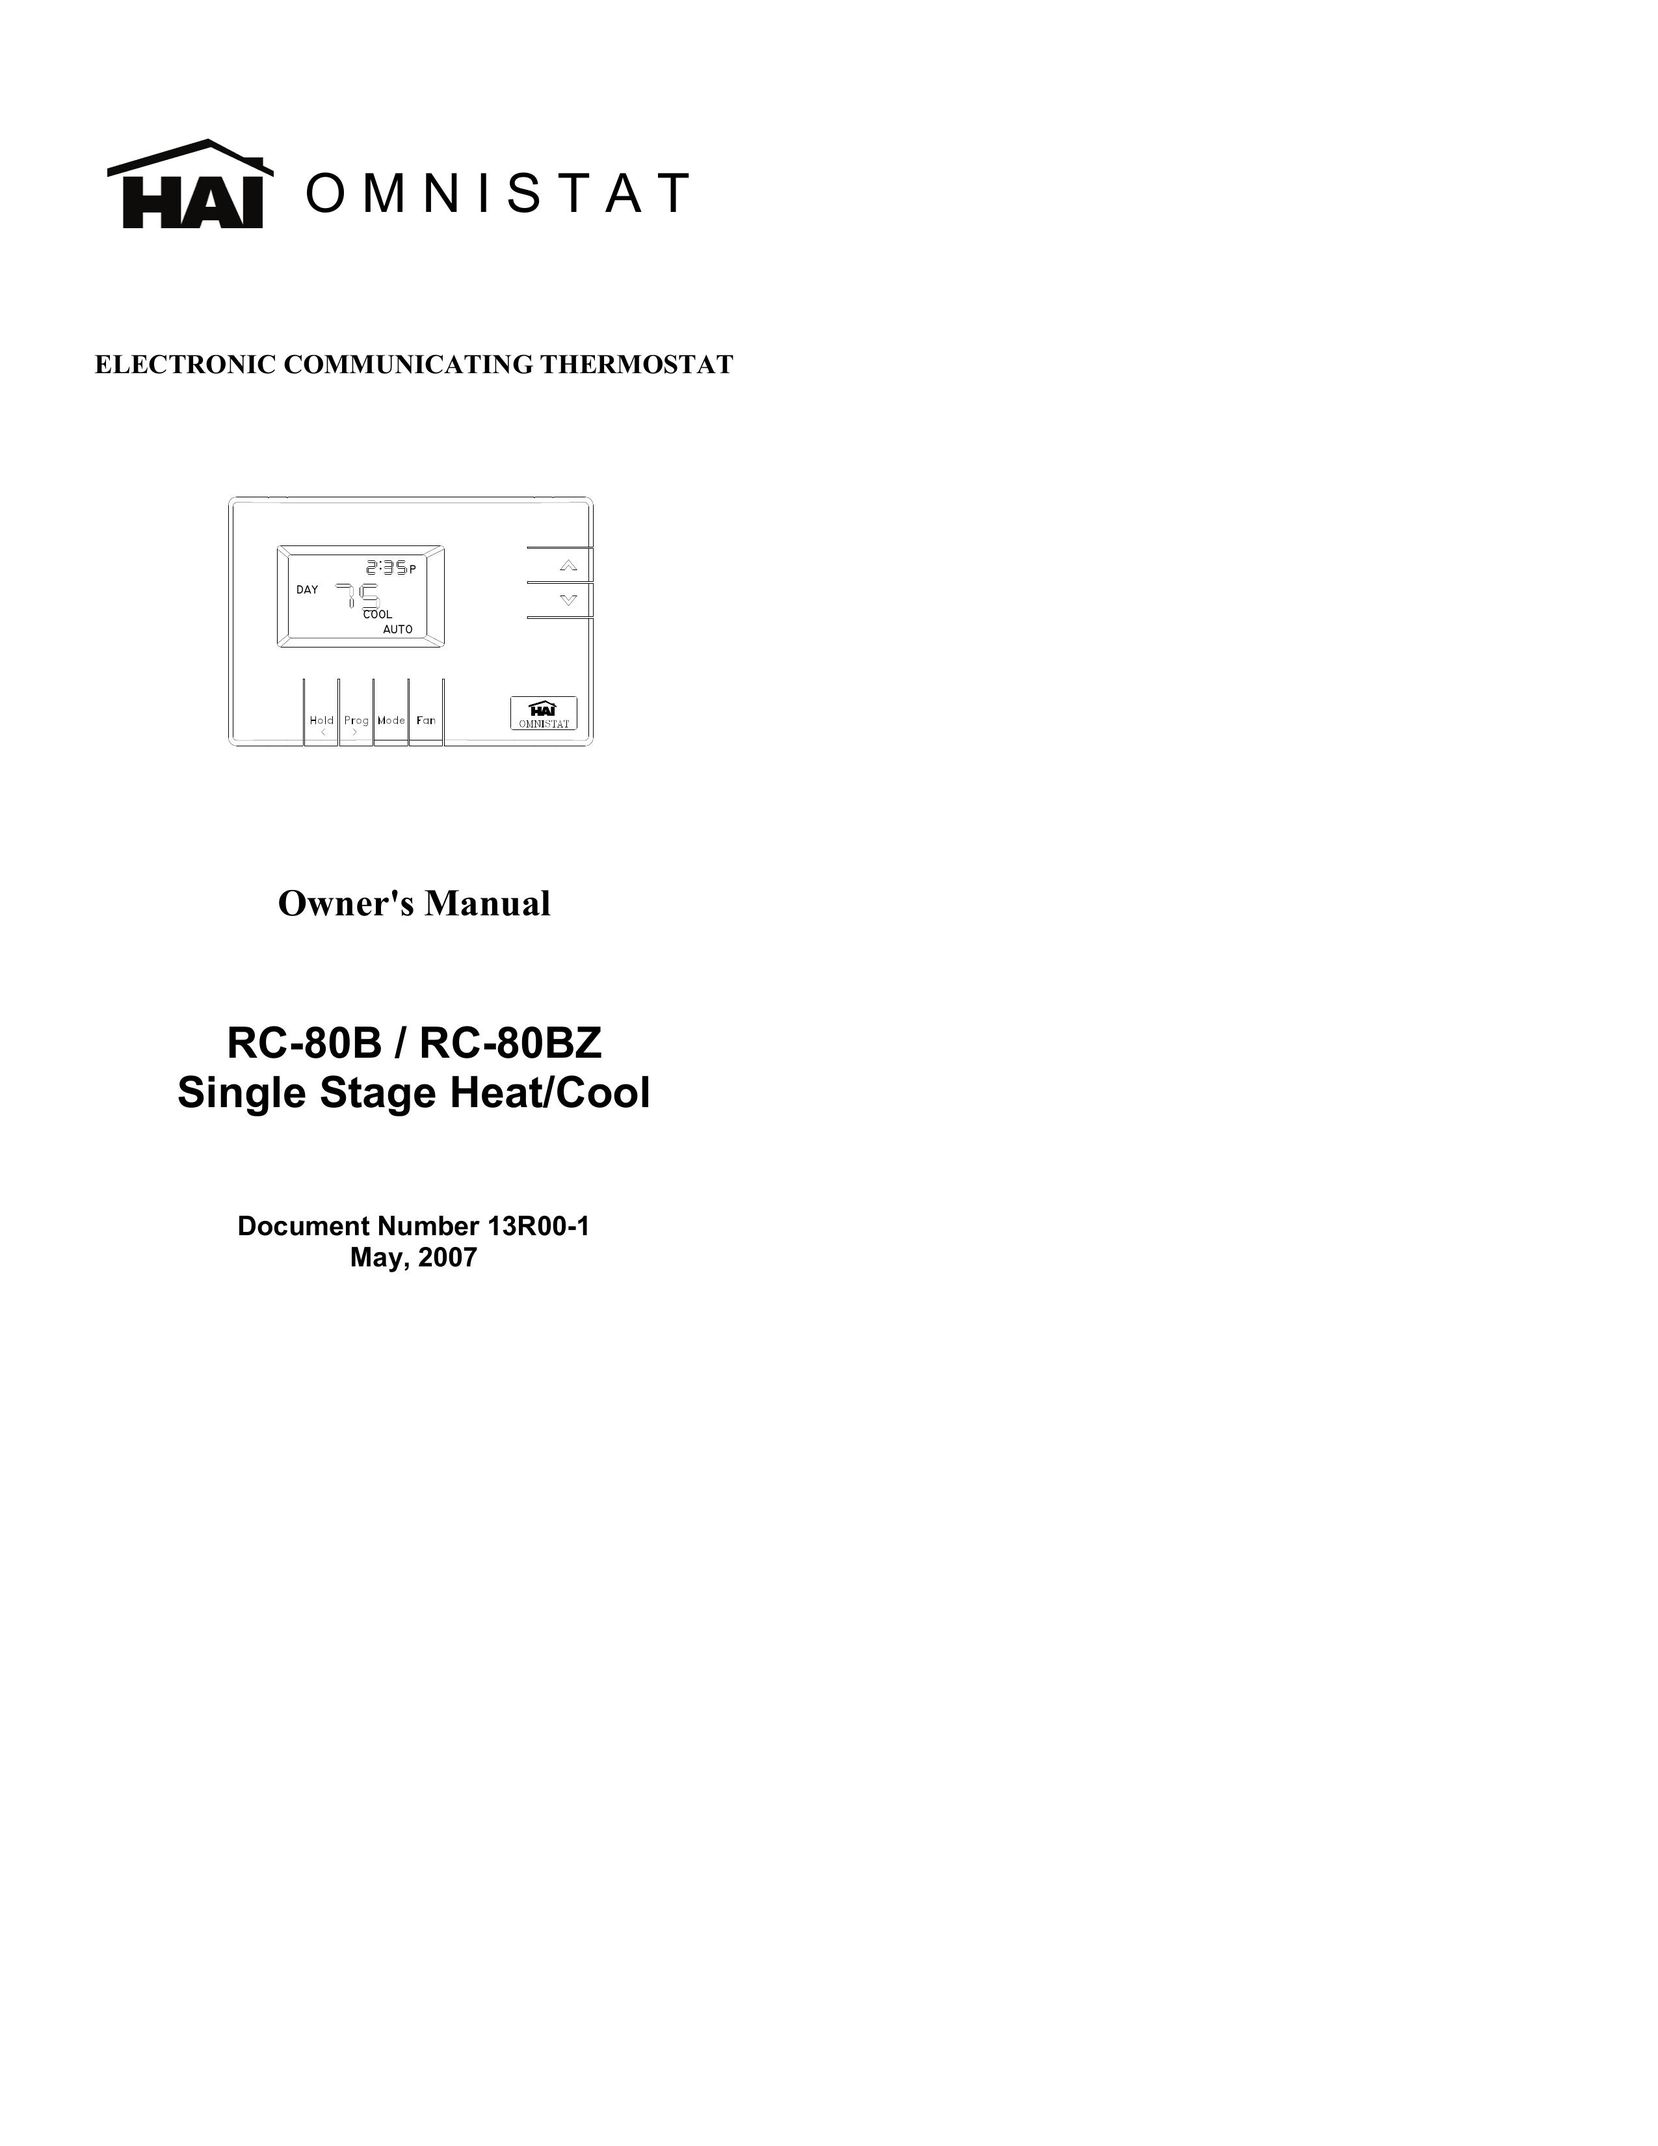 Home Automation RC-80BZ Thermostat User Manual